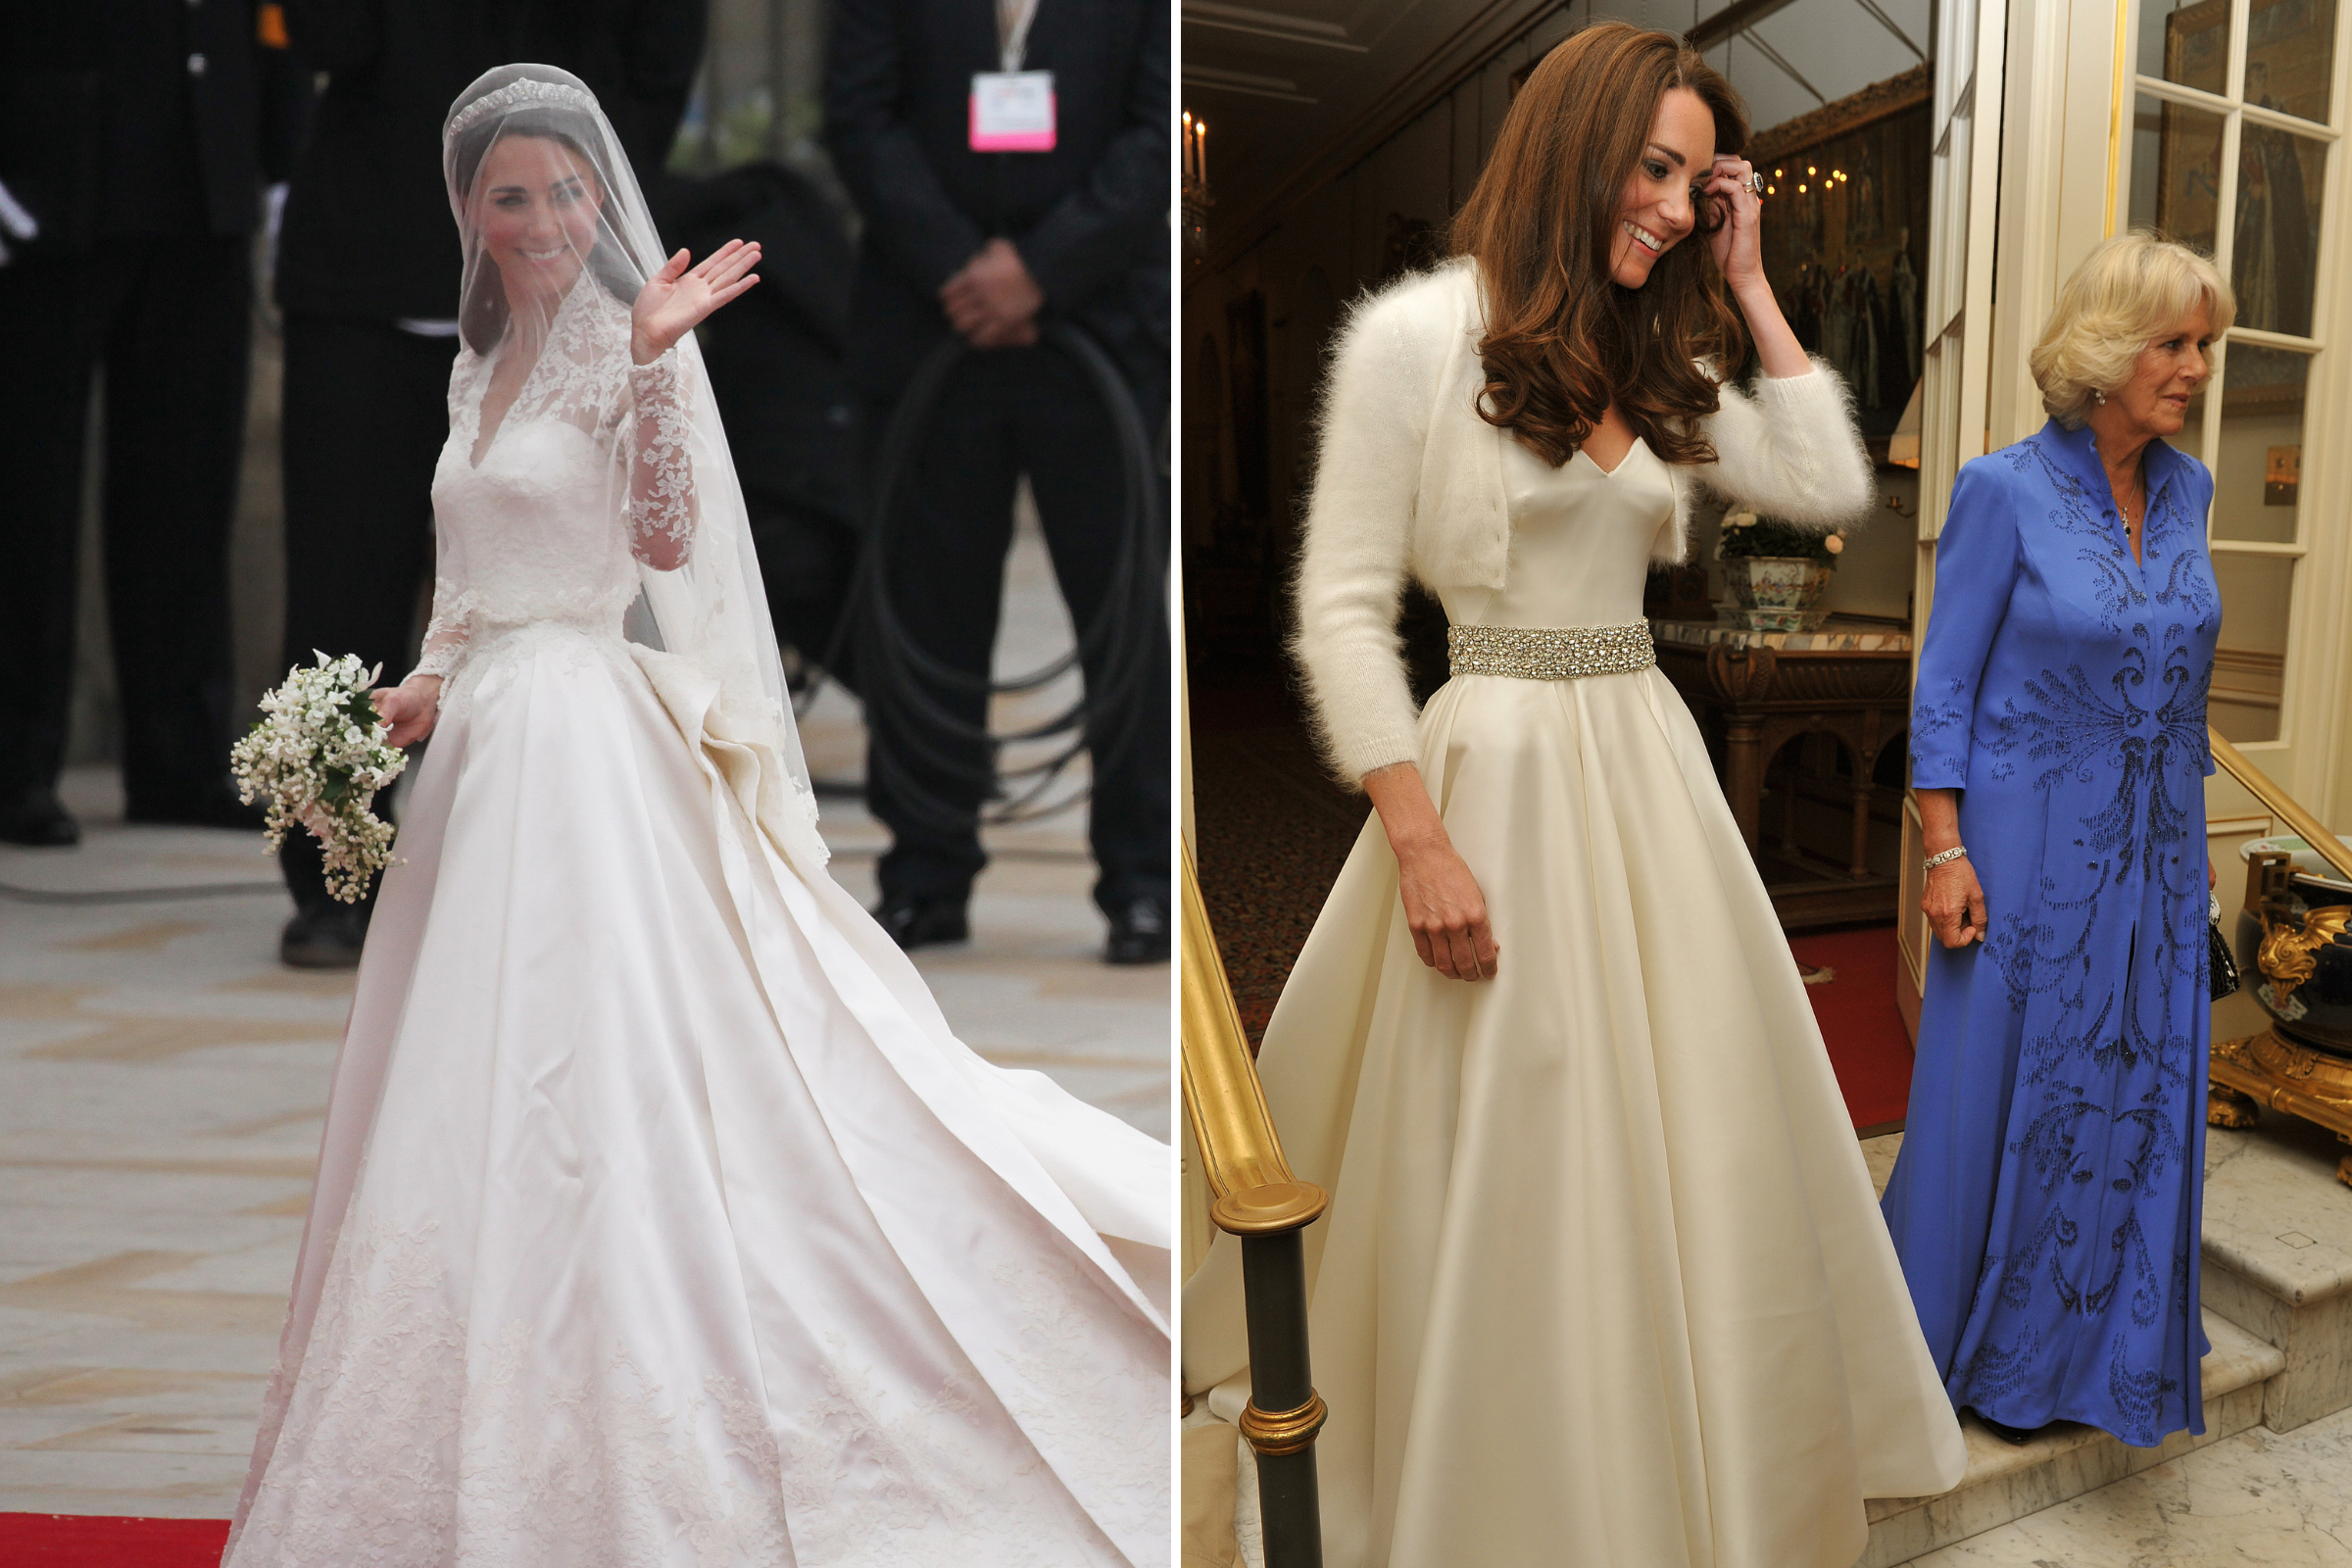 Kate Middleton Stuns in Low-Cut Evening Gown After Royal Christening |  Vanity Fair